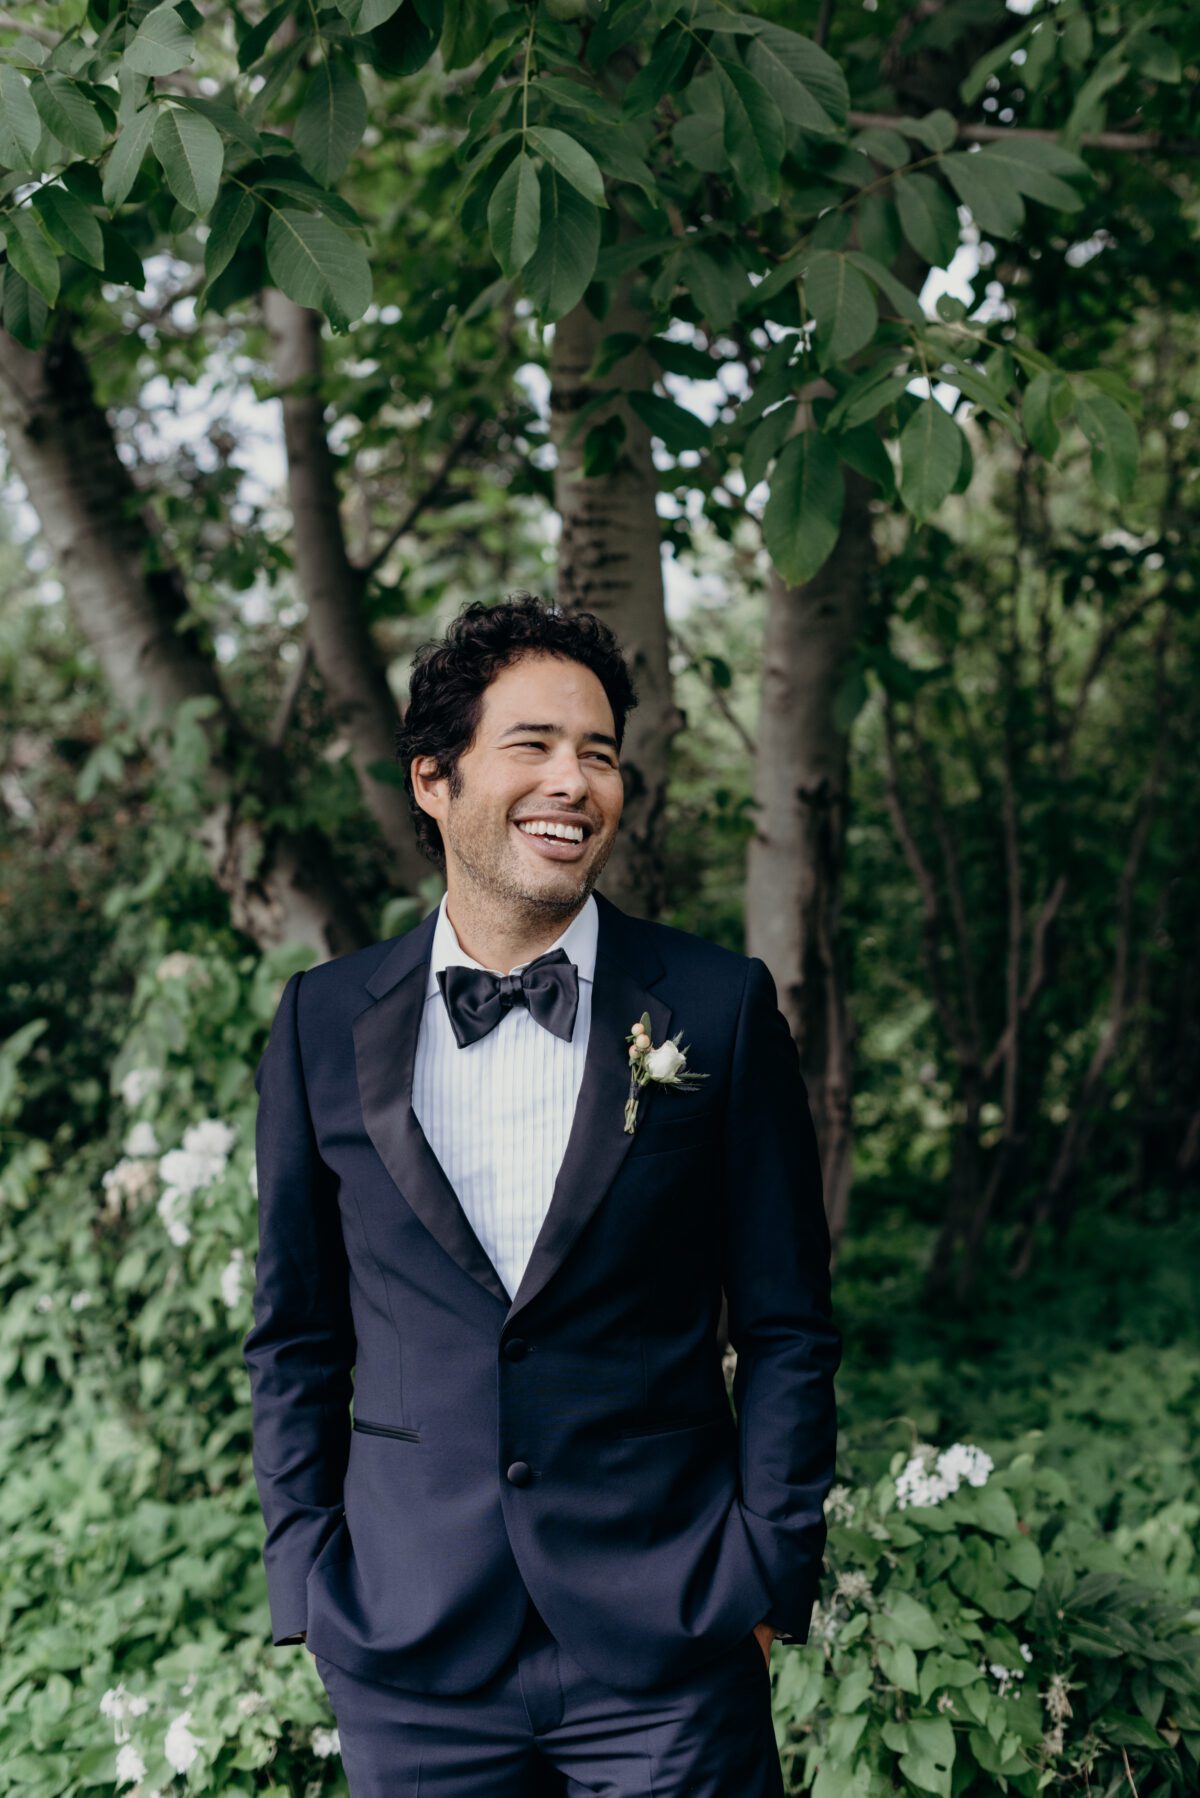 A happy and smiling groom in a black tuxedo poses in front of the garden at mt hood organic farms